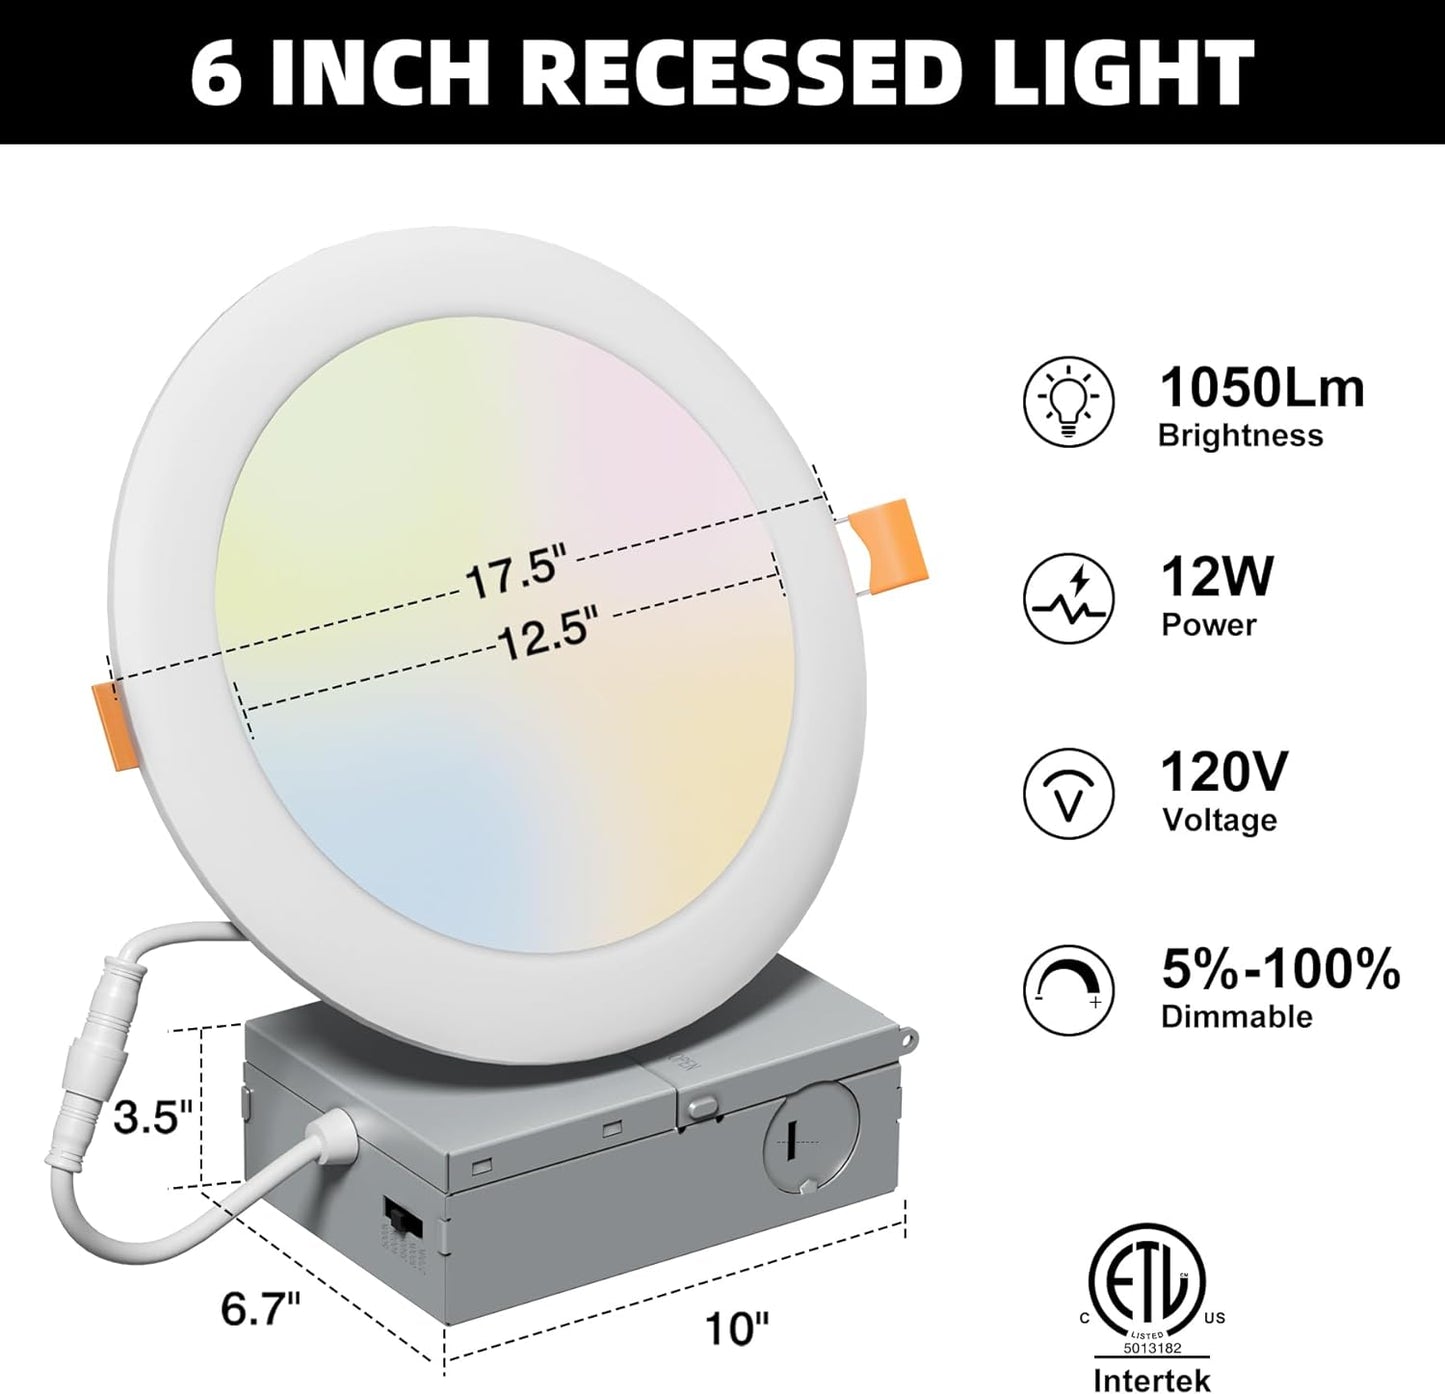 suchot 24Pack 6 Inch 5CCT LED Recessed Lighting - Junction Box, Adjustable Color Temperature, Brightness - 1050LM, 12W,ETL&FCC (24 Count (Pack of 1))